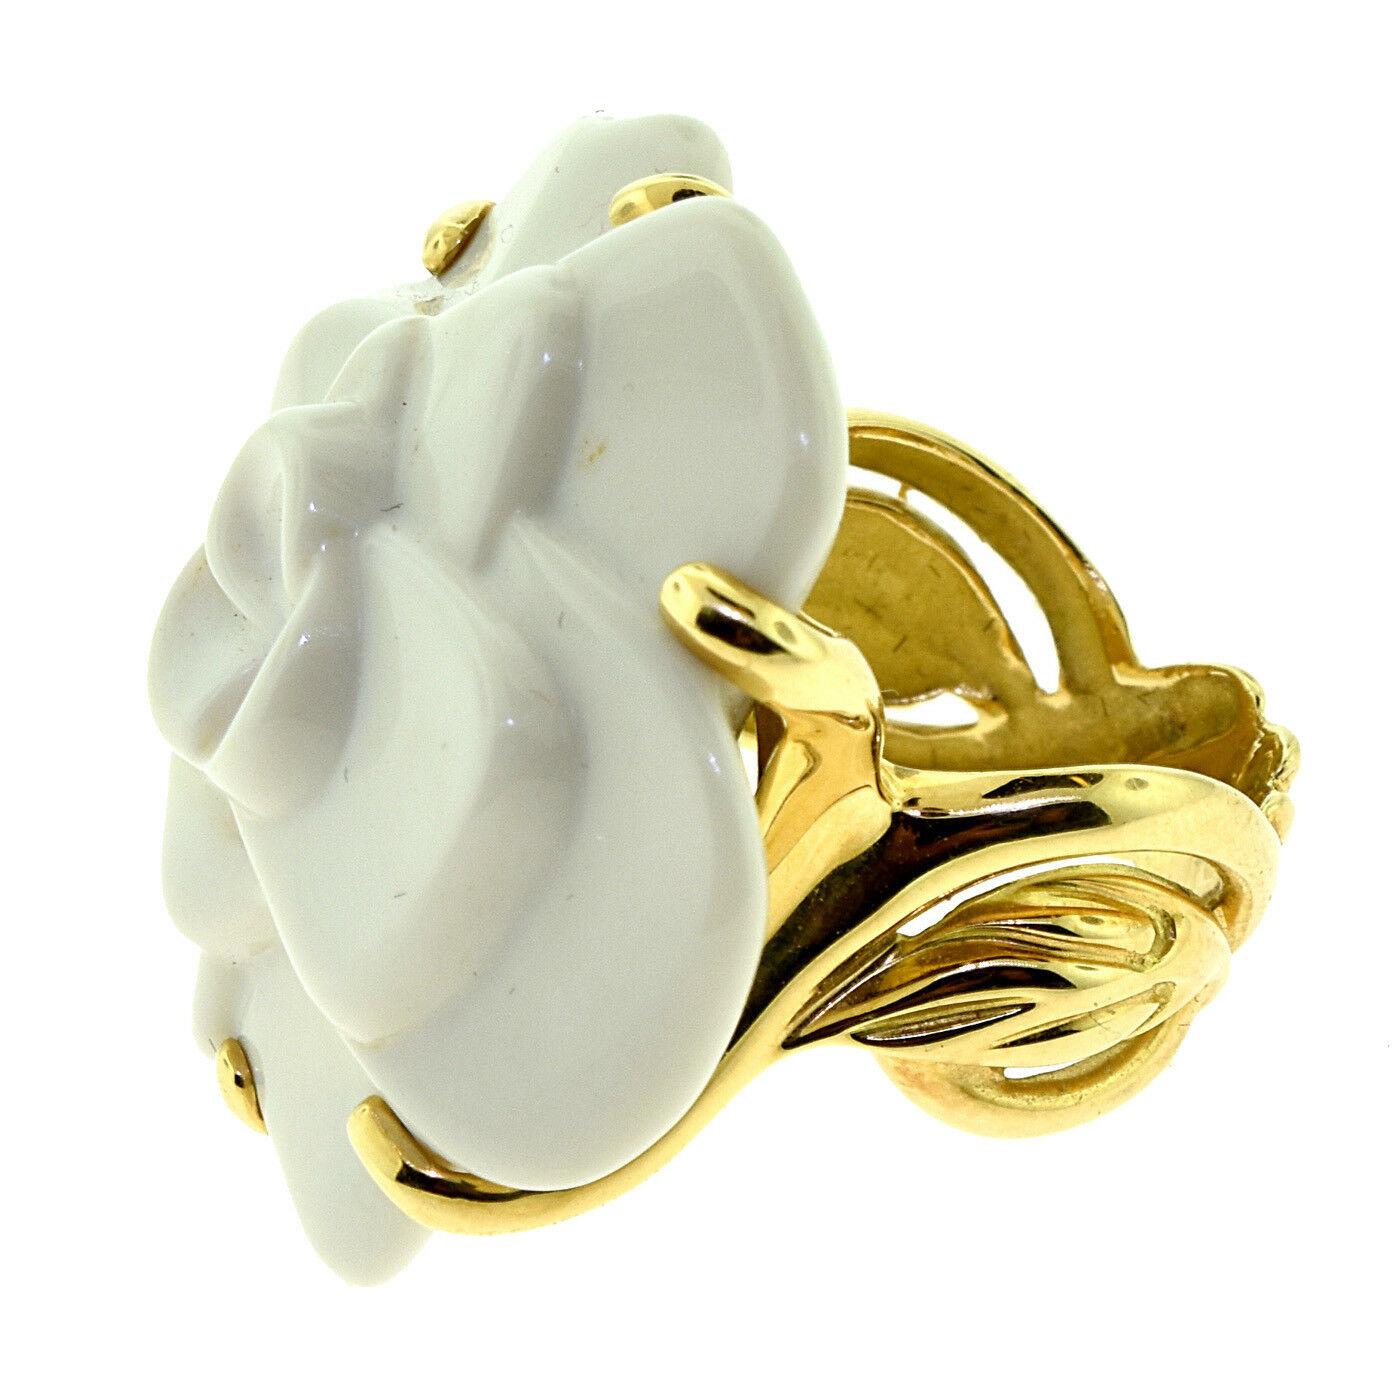 Brilliance Jewels, Miami
Questions? Call Us Anytime!
786,482,8100

Brand: Chanel

Collection: Camellia

Metal: Yellow Gold

Metal Purity: 18k

Stone: Agate

Flower Dimensions: 1.25 inch diameter (approx.)

Total Item Weight (grams): 18.7

Ring Size: